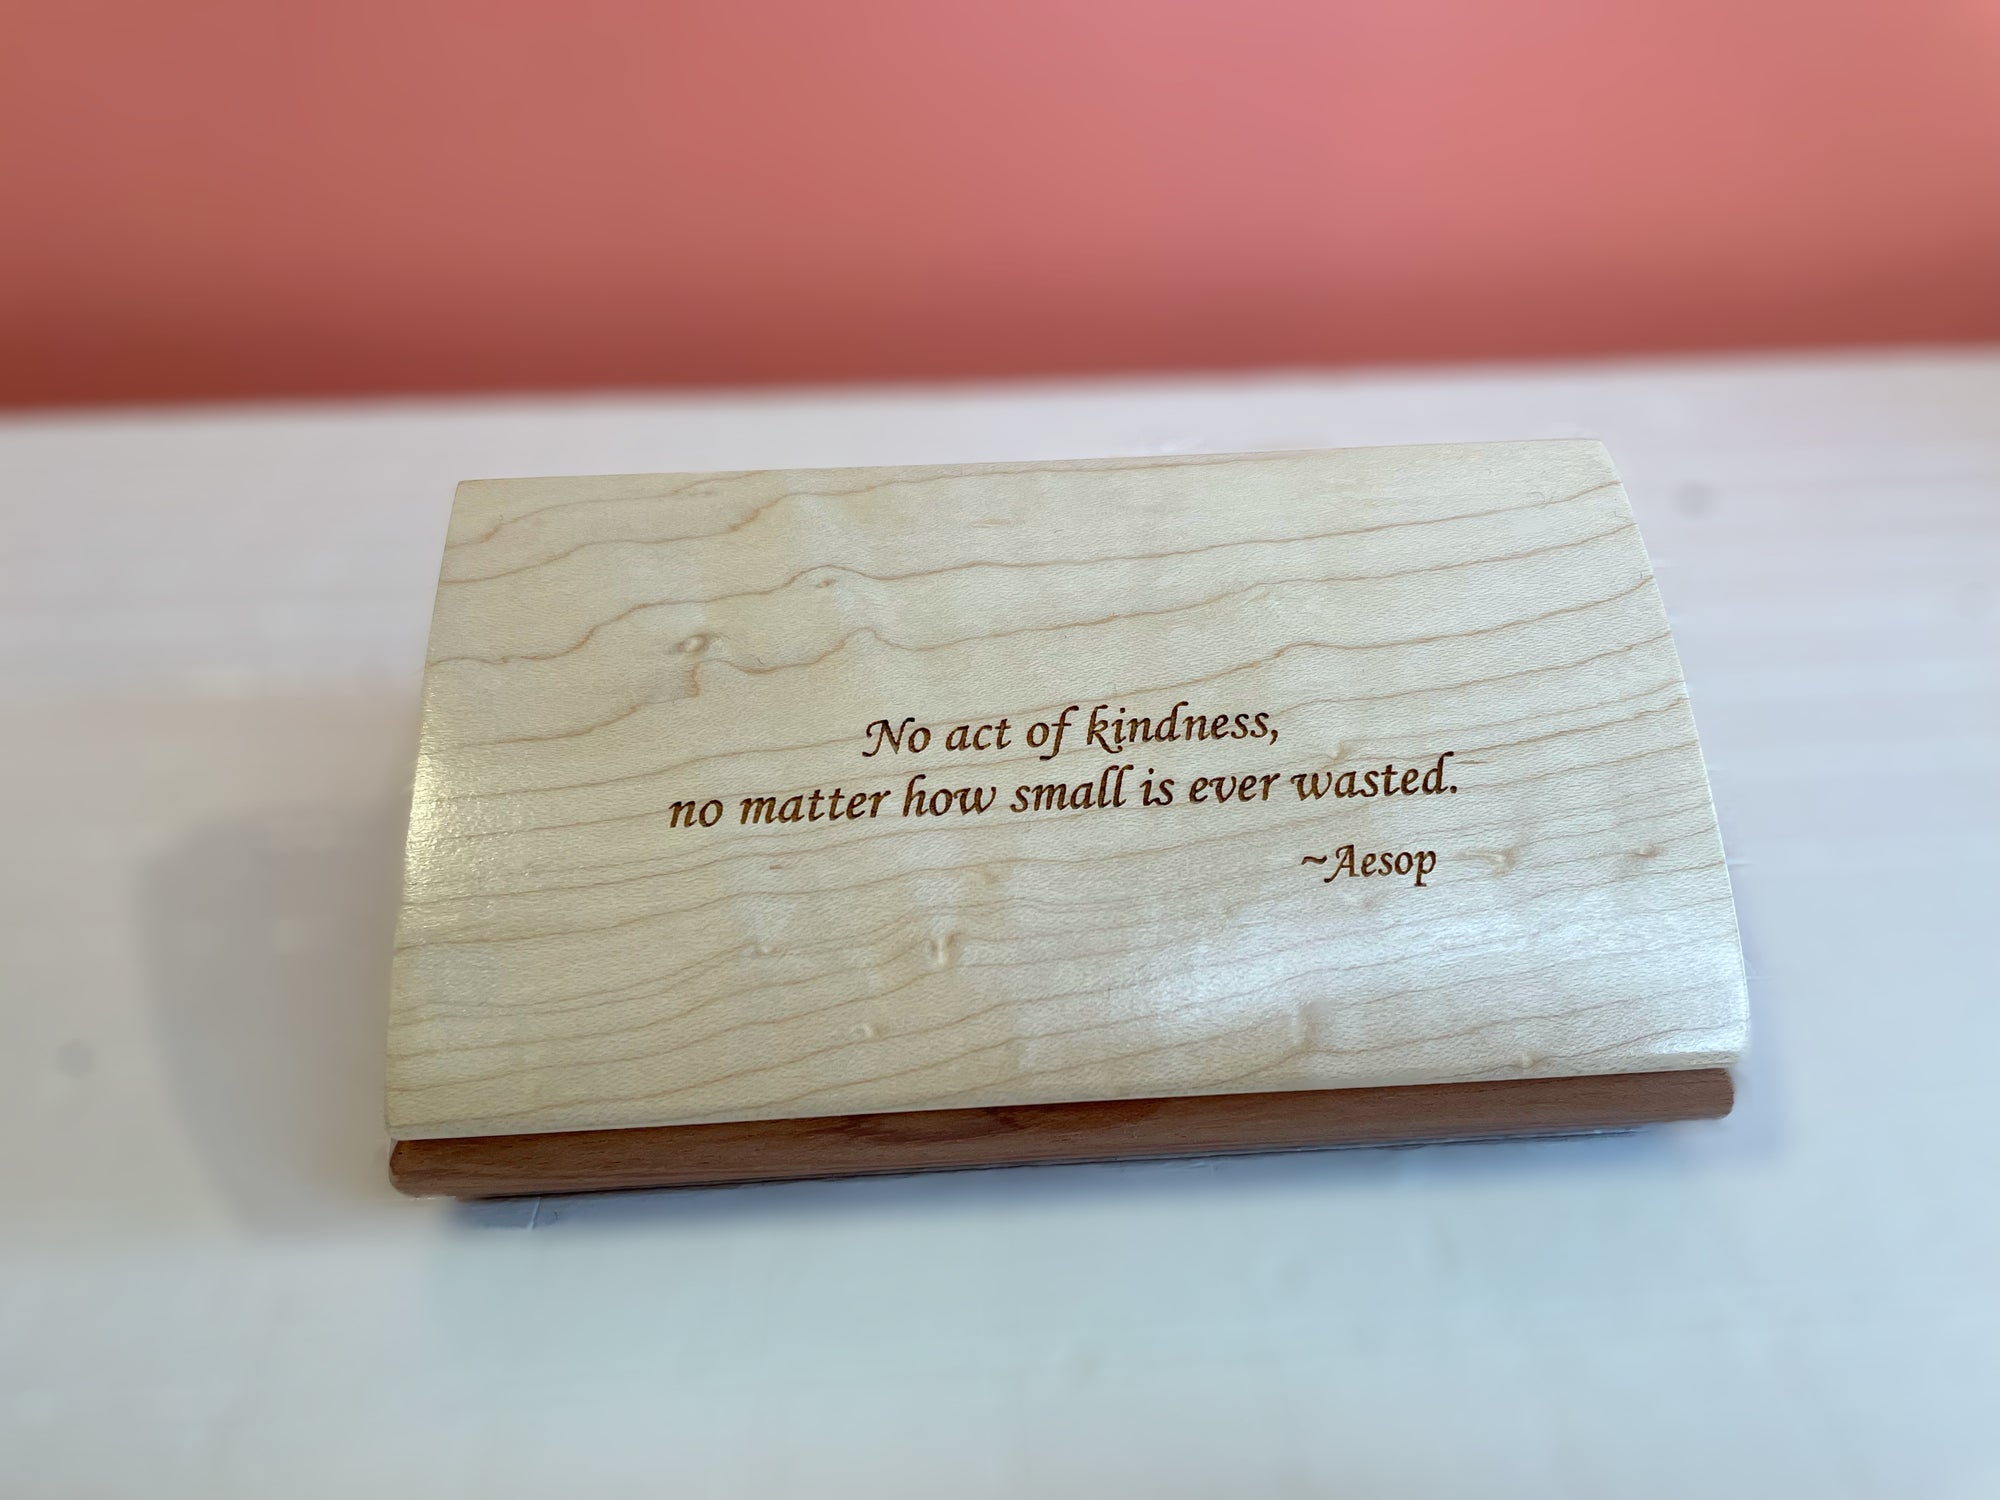 Mikutowski Woodworking Hand crafted Wooden Inspirational Box - Act Of Kindness available at The Good Life Boutique